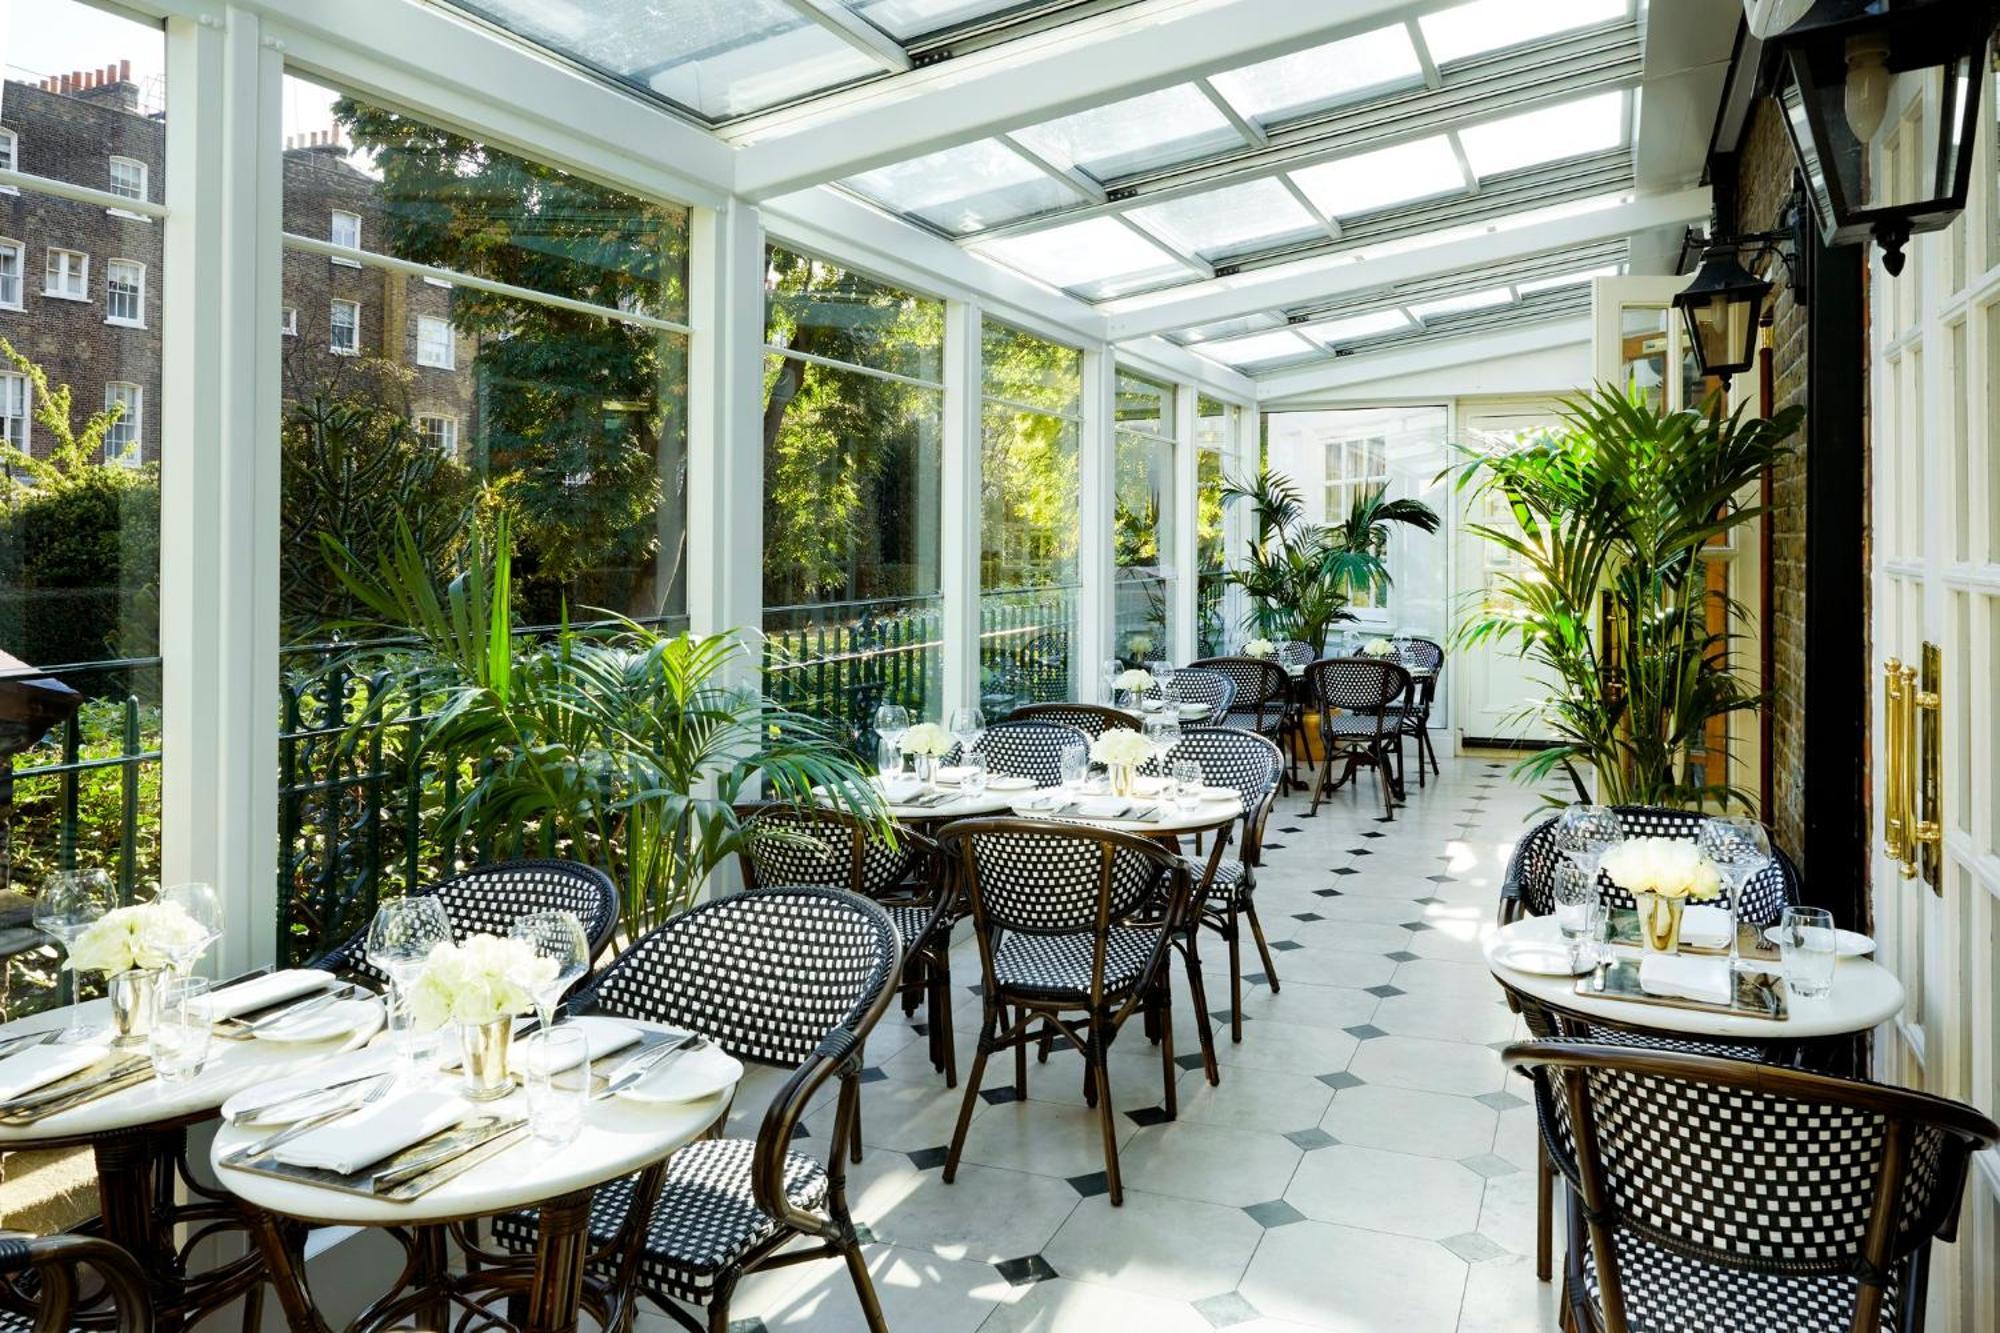 The Montague On The Gardens Hotel Londres Exterior foto